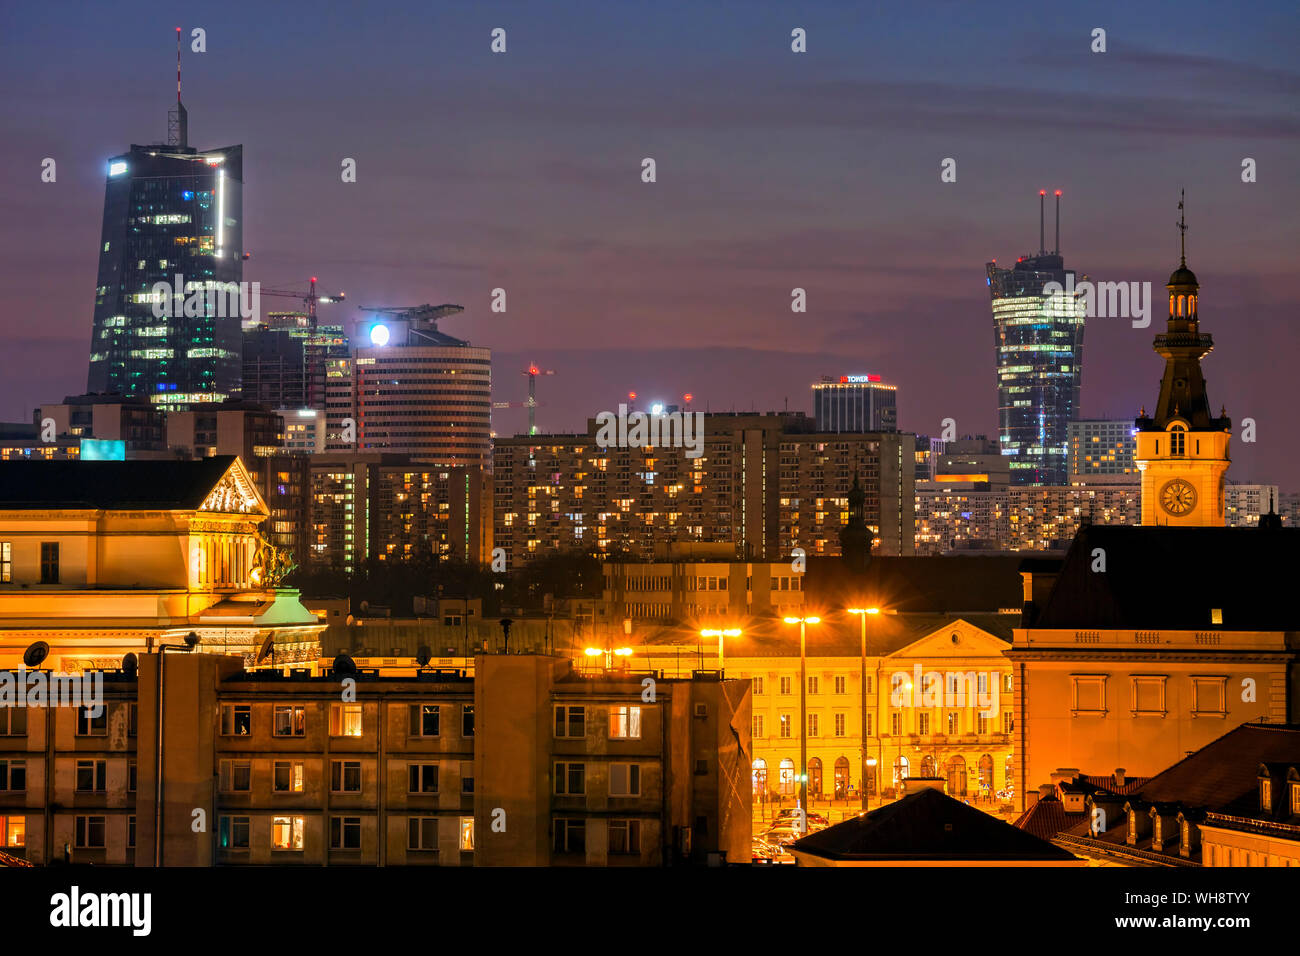 Evening cityscape, downtown district, Warsaw, Poland Stock Photo